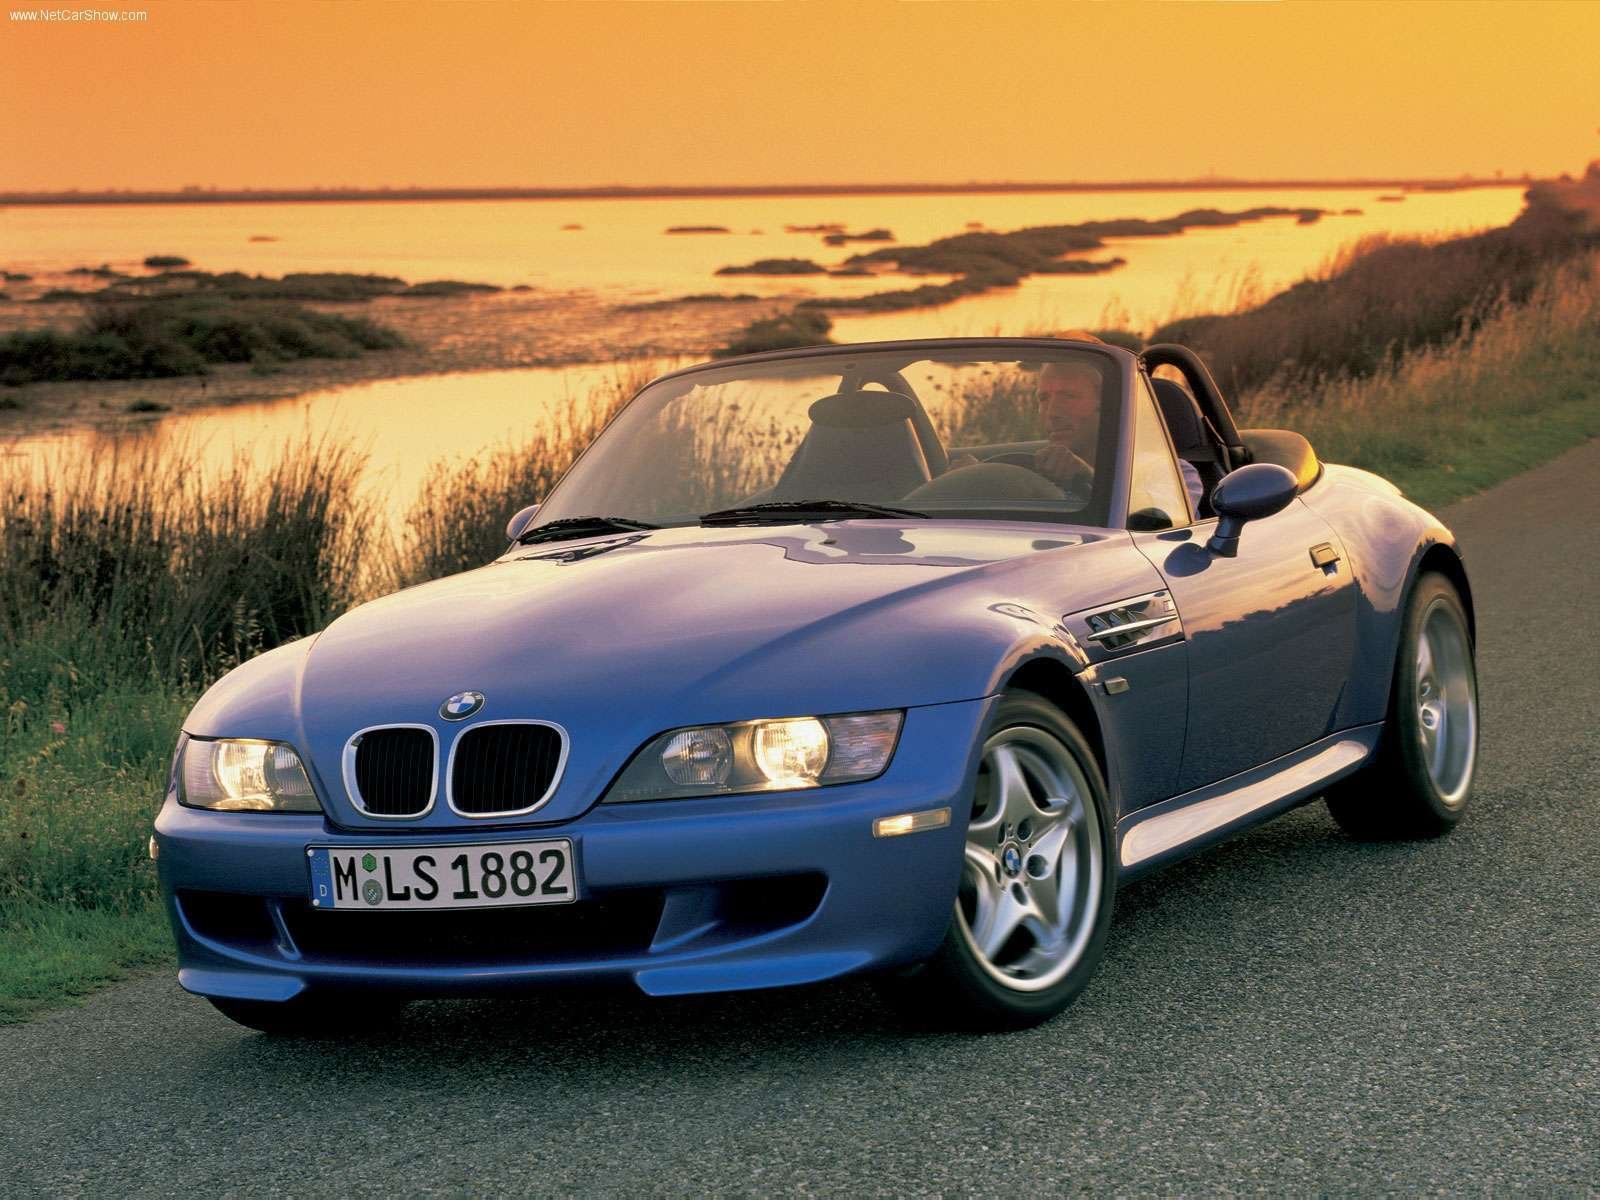 1999, Bmw m, Roadster, Cars, Convertible, Germany Wallpaper